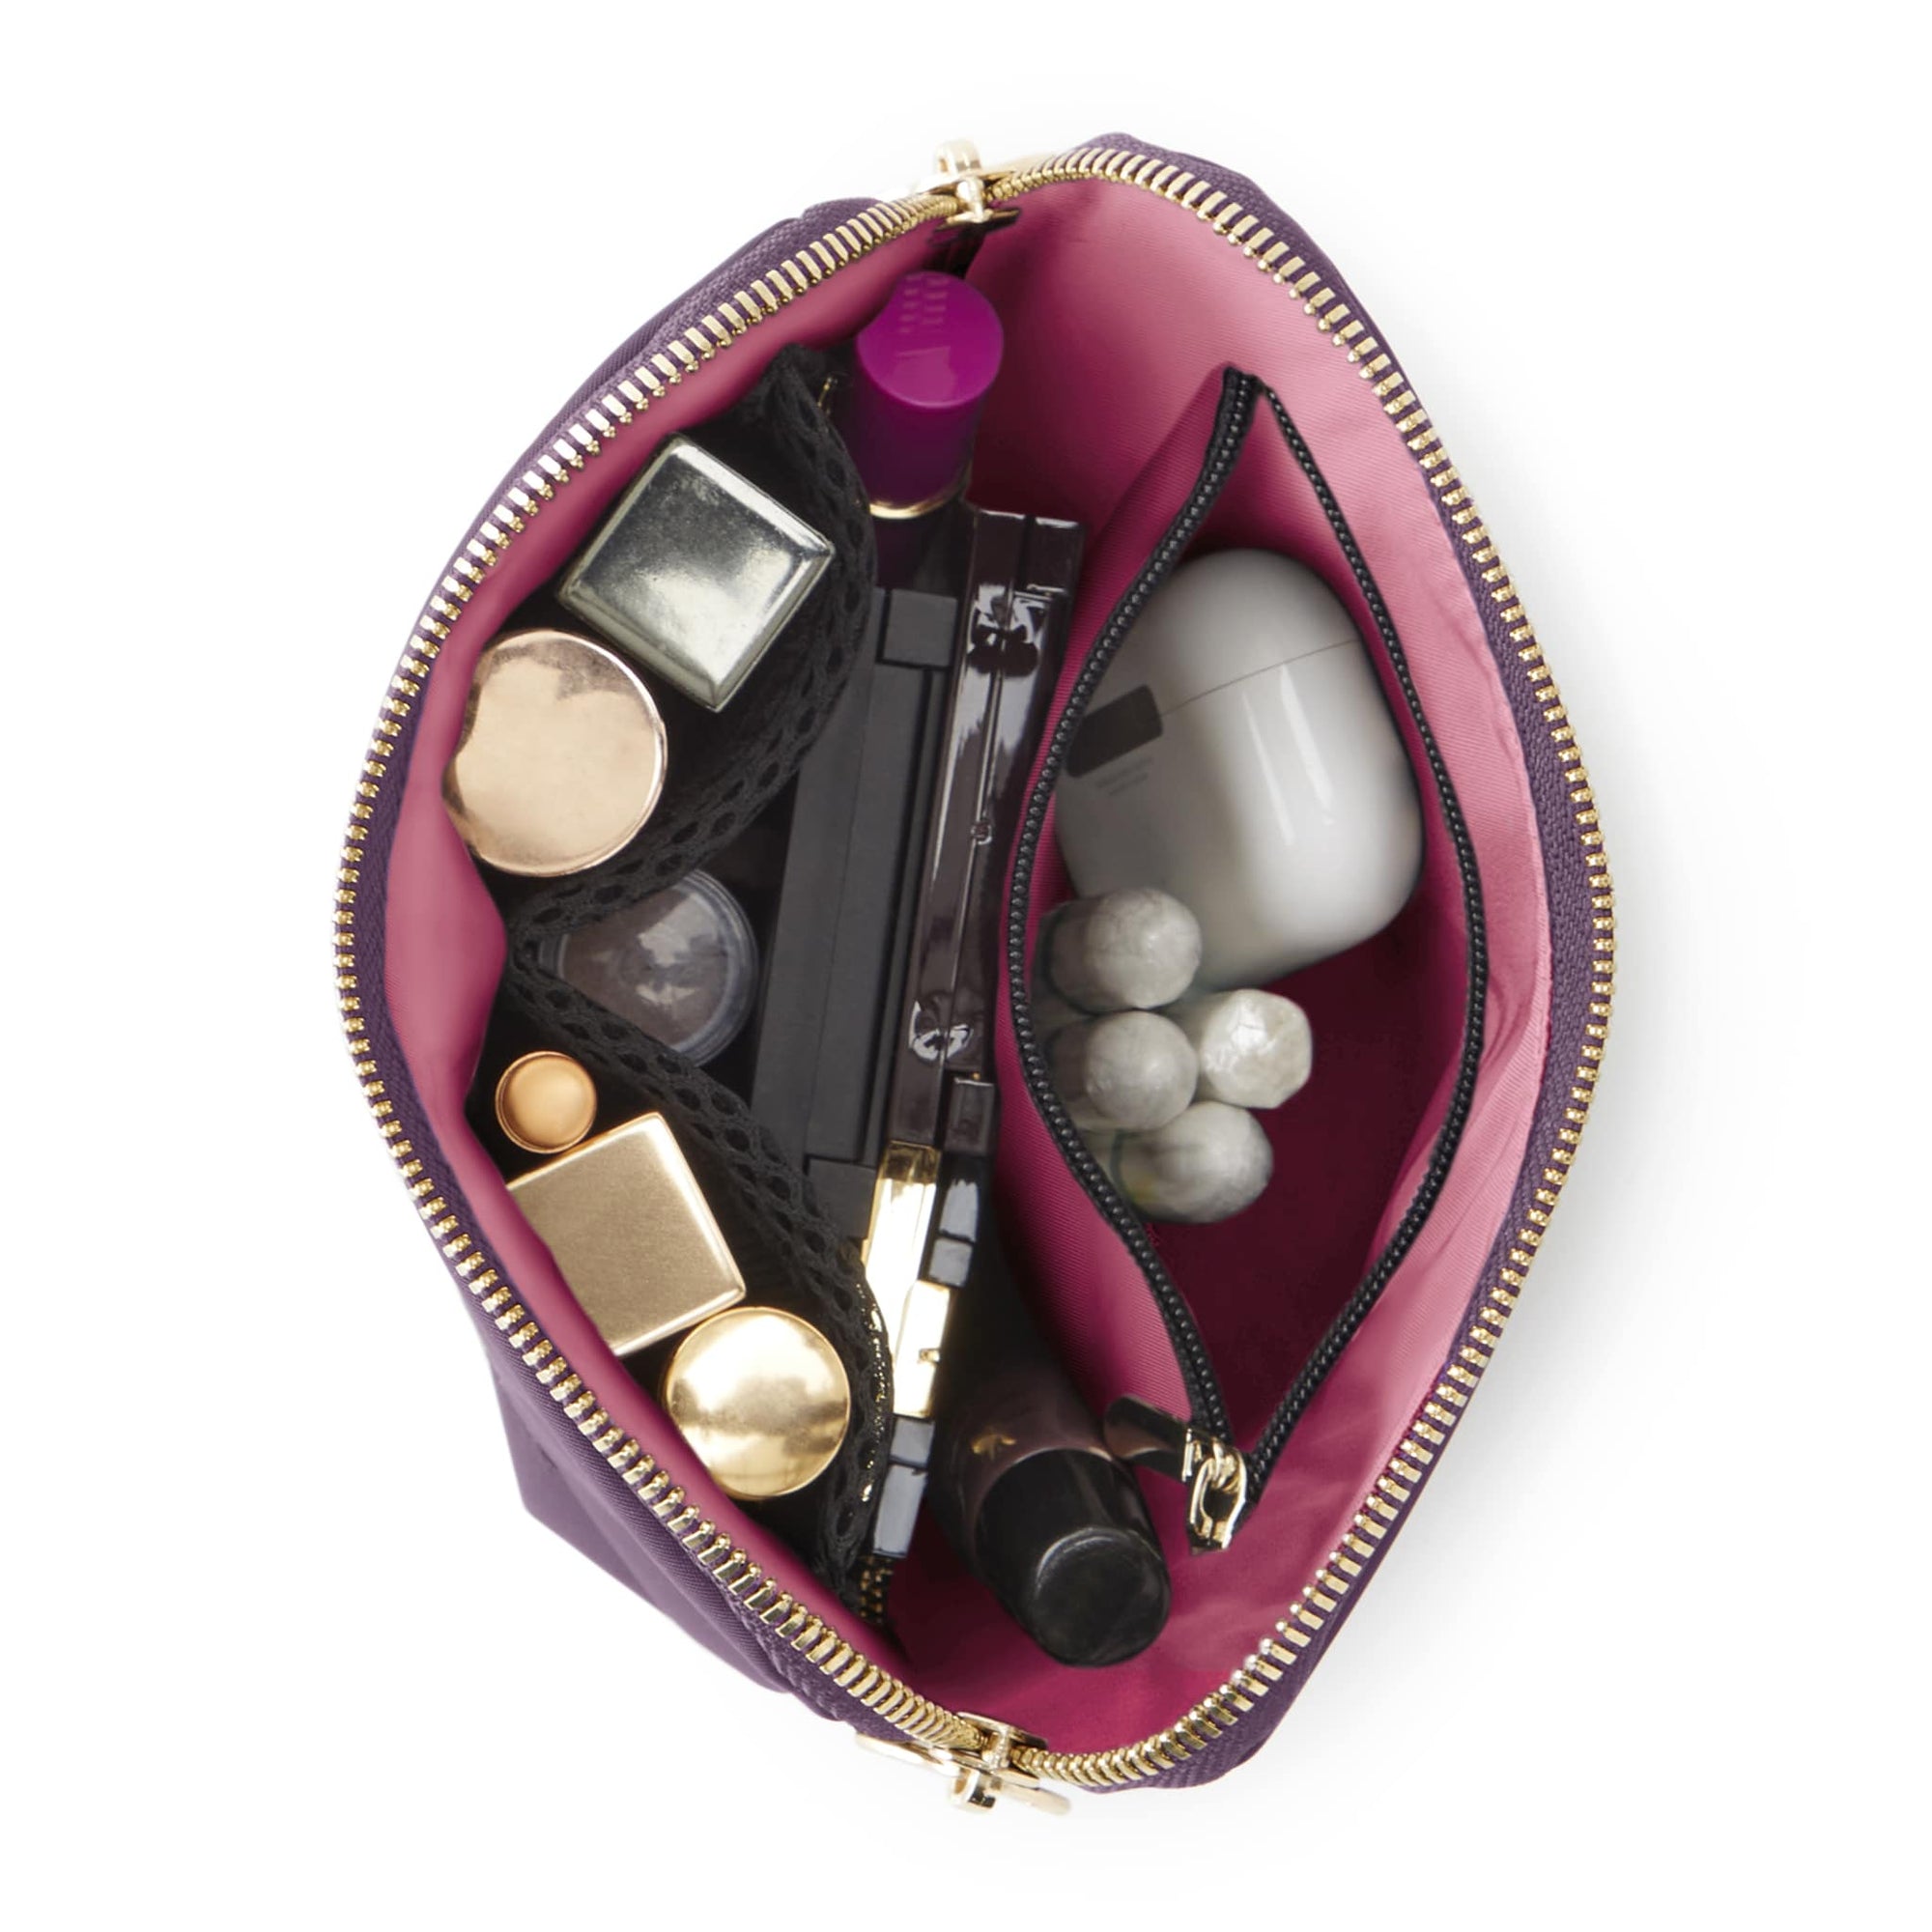 color: Plum Fabric with Dusty Rose Interior; alt: Everyday Small Size Makeup Bag | KUSSHI